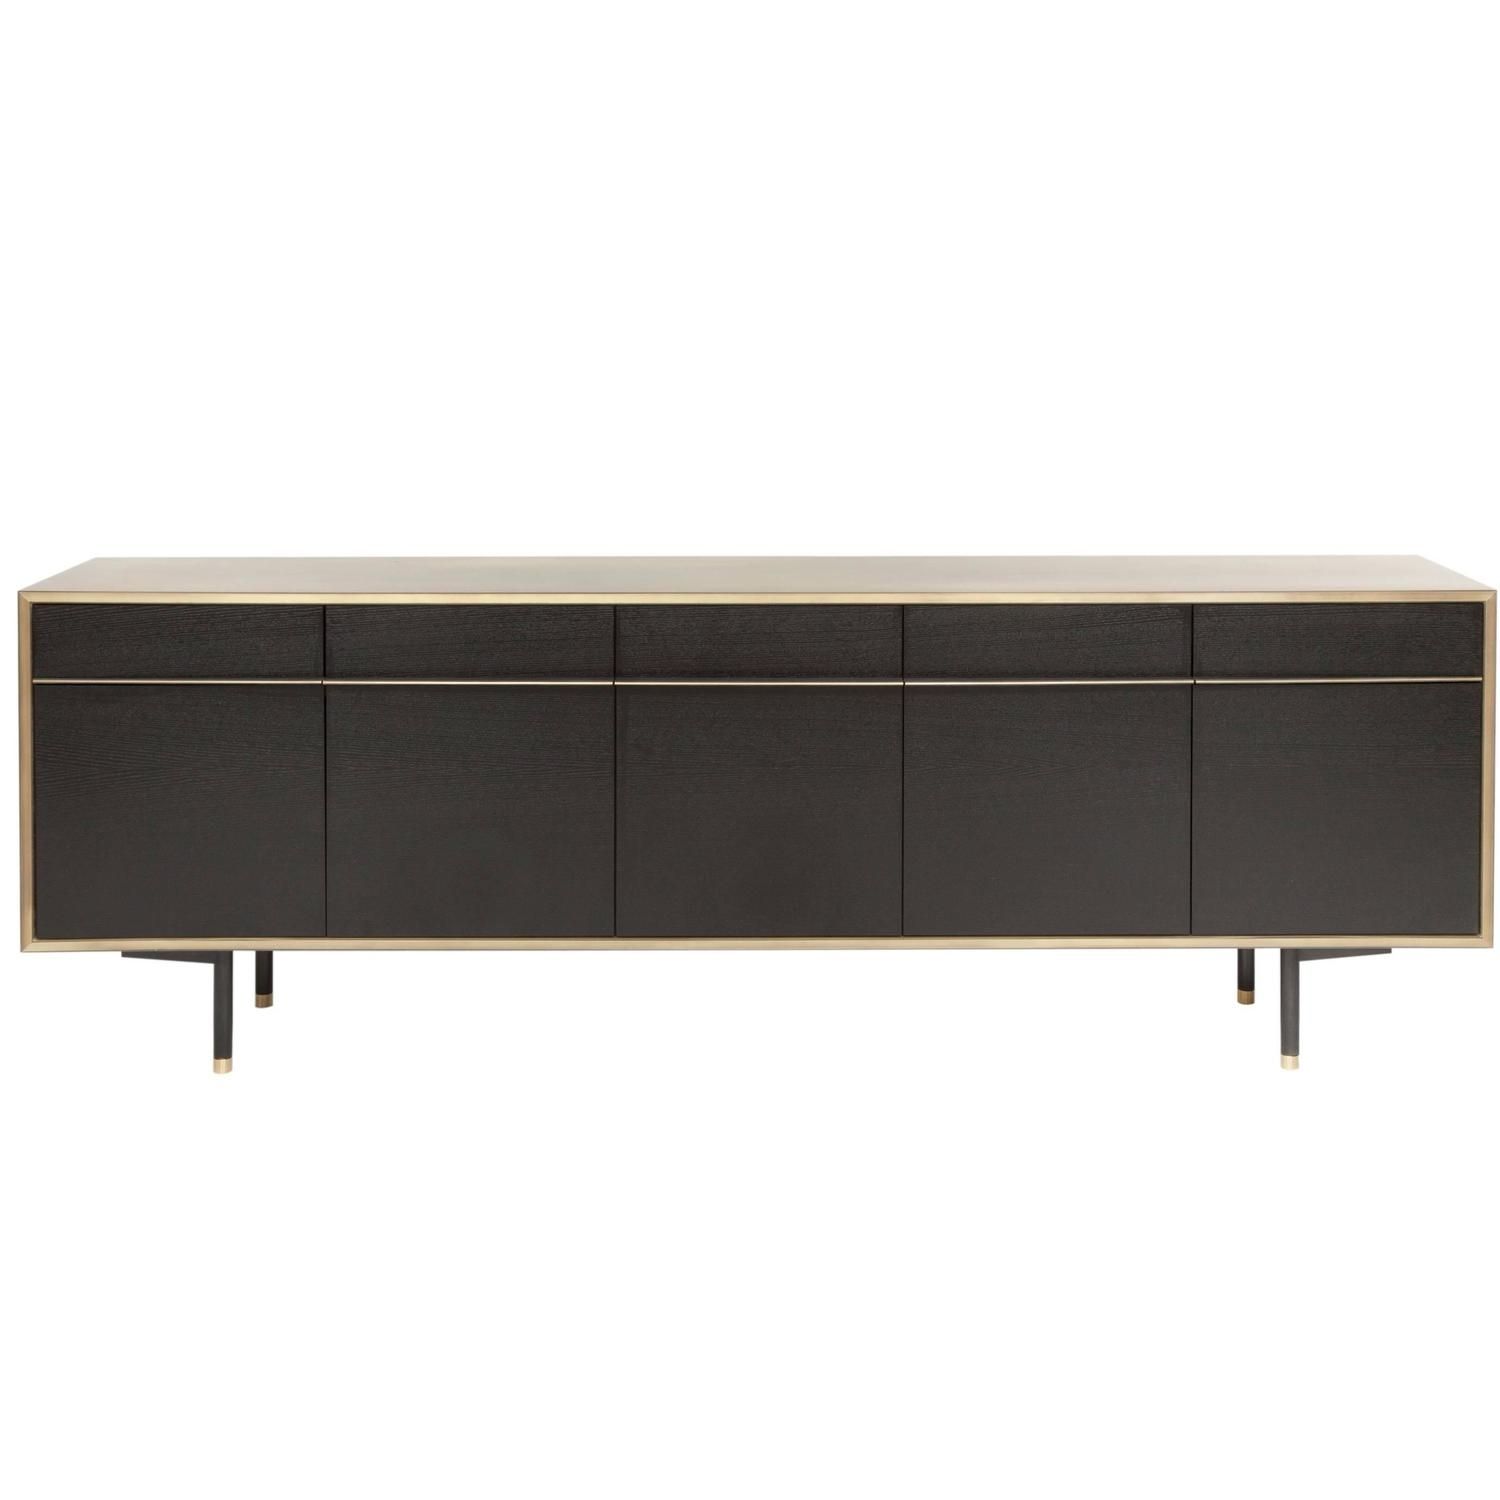 Modern Sideboards – 320 For Sale At 1stdibs With Regard To Best And Newest Corrugated Metal Sideboards (View 17 of 20)